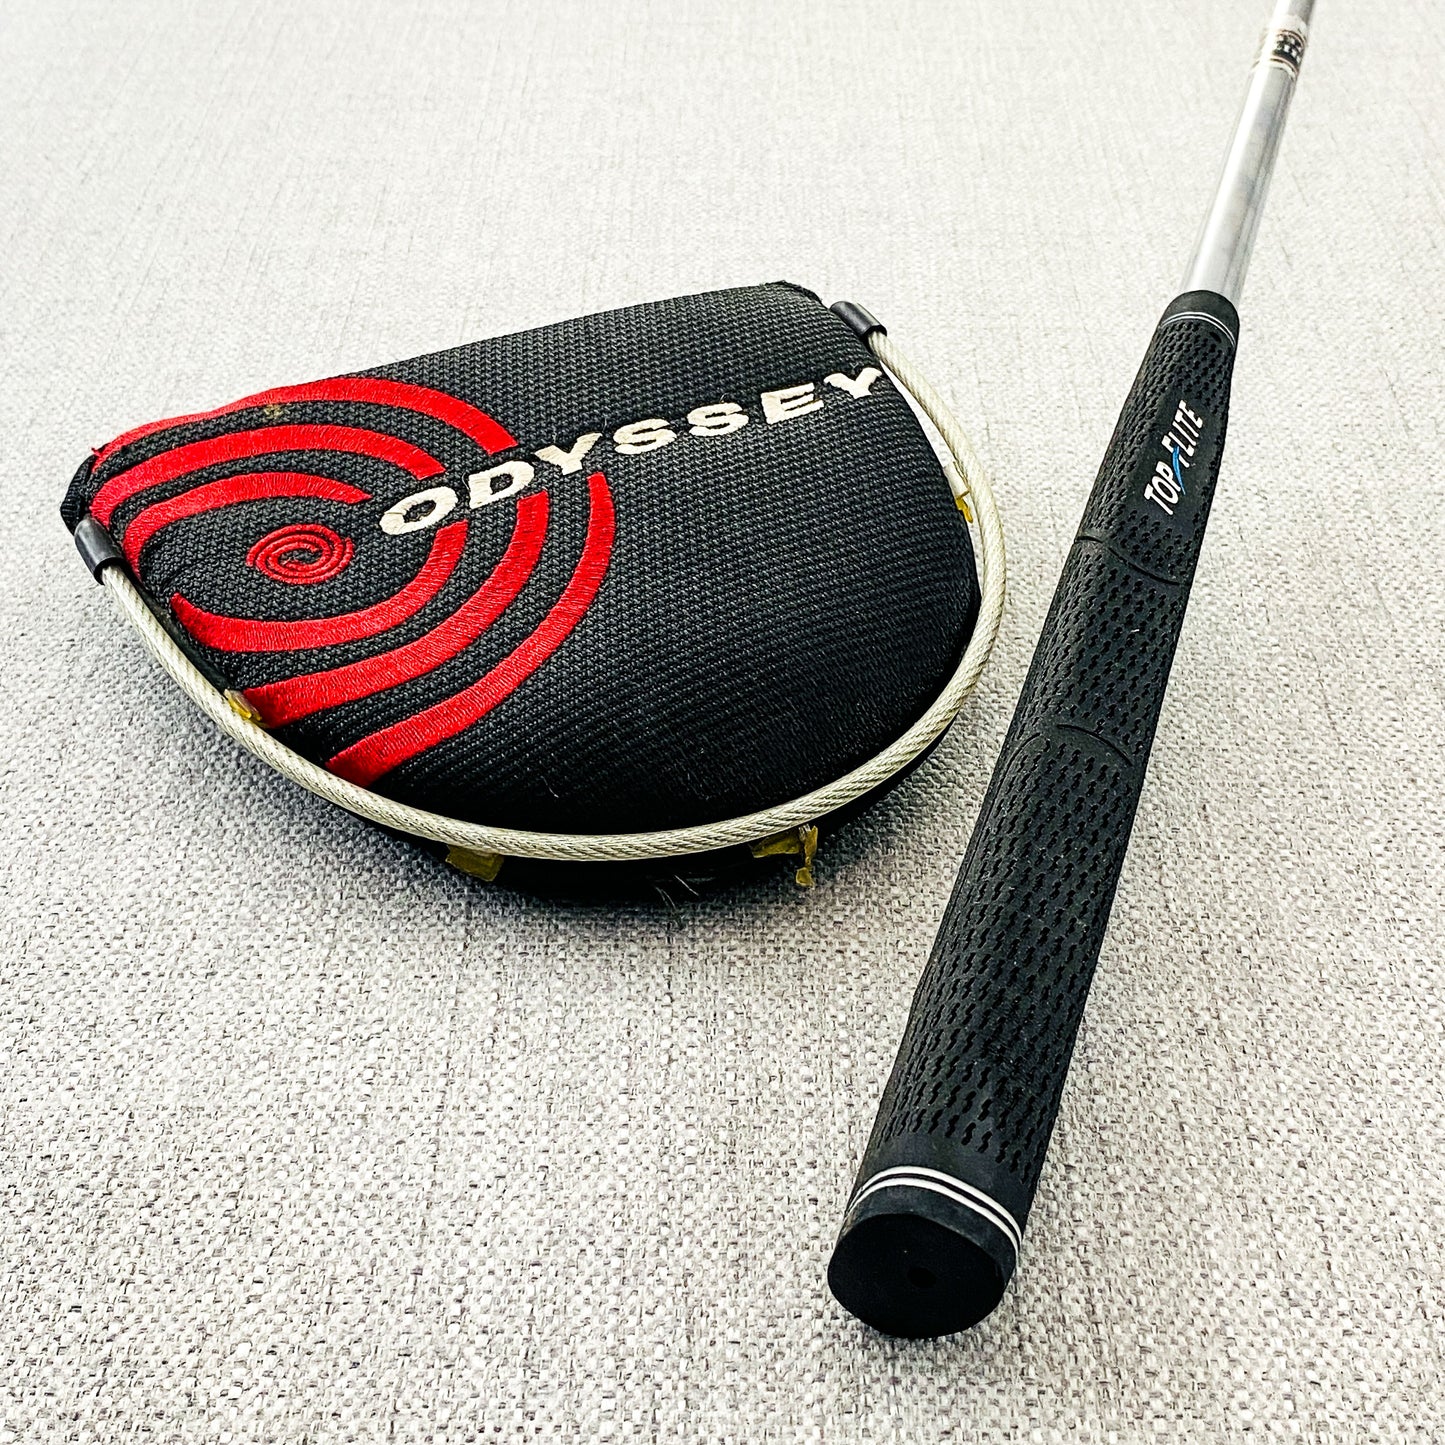 Odyssey White Hot TriBall SRT Putter. 35 inch - Average Condition # 11782